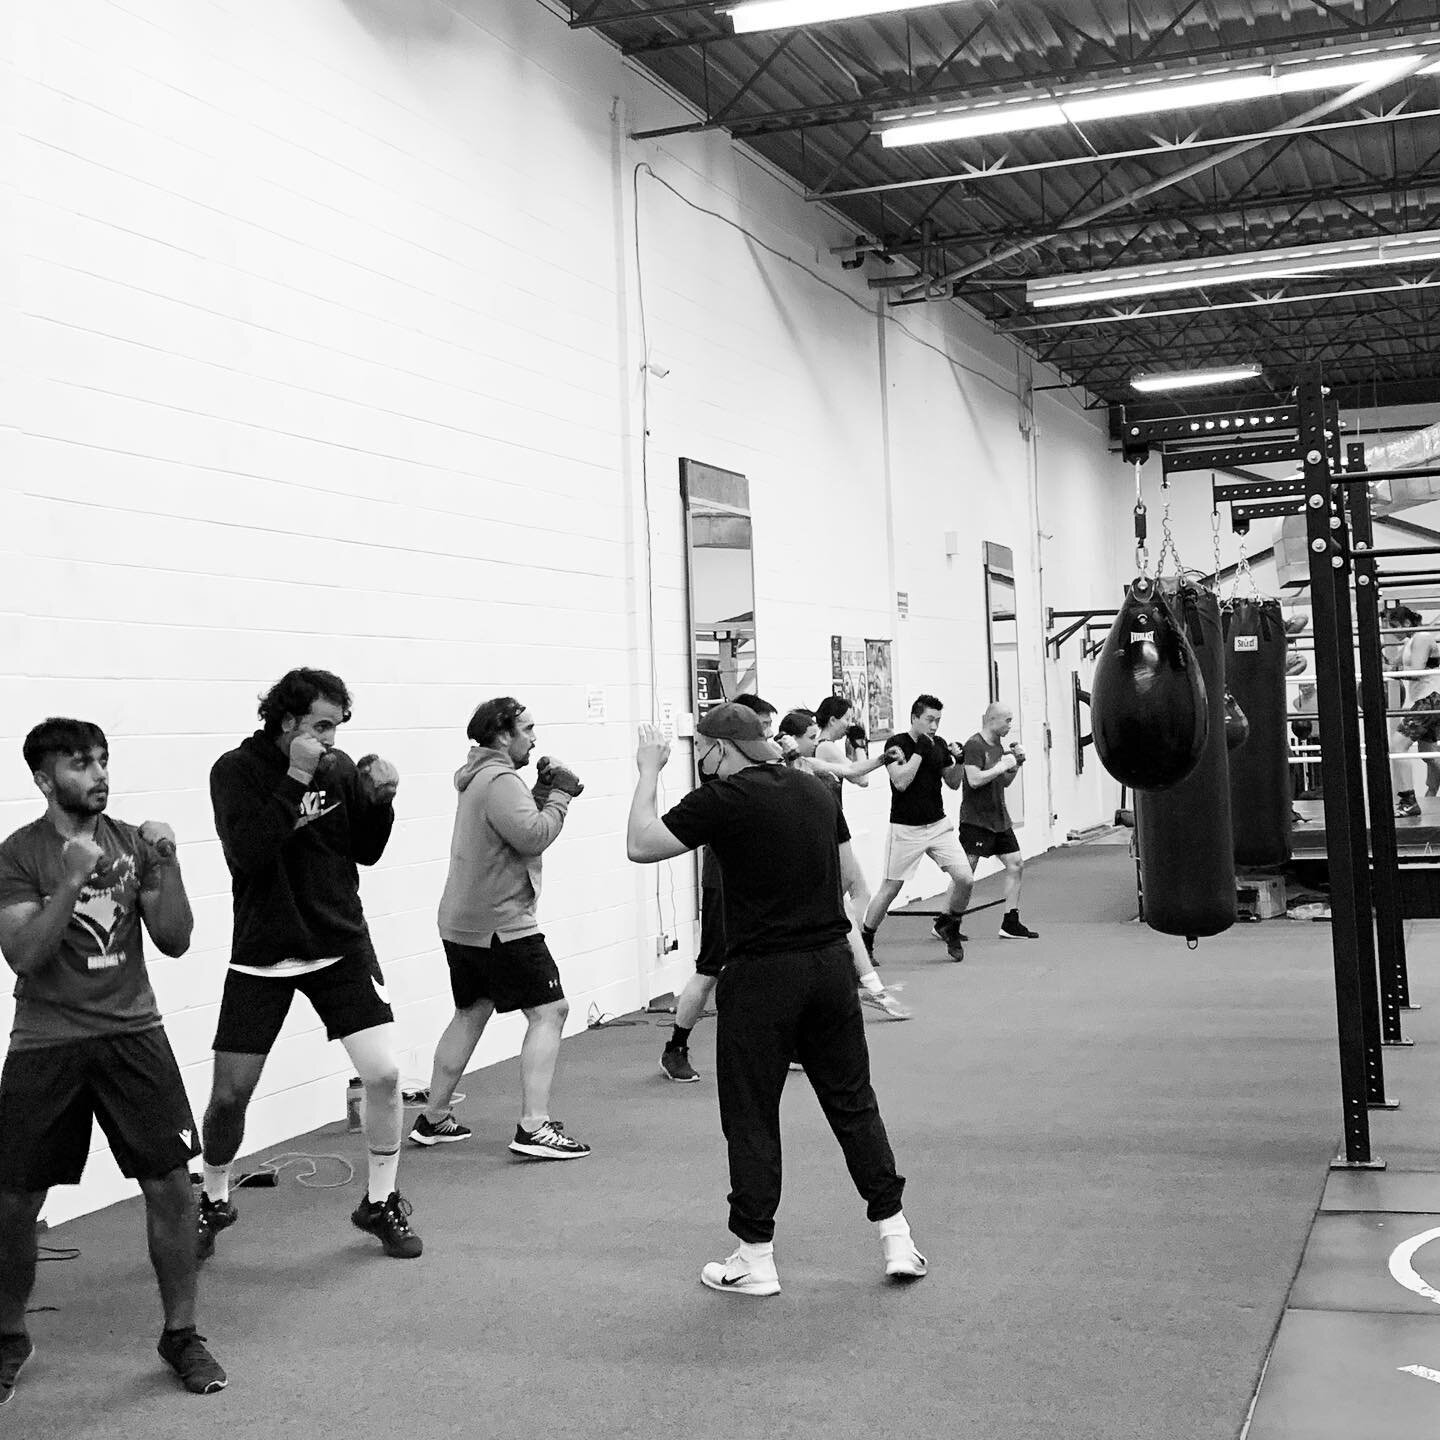 Sometimes just being motivated isn&rsquo;t enough. Making it your lifestyle means no excuses. 

&ldquo;A little progress each day adds up to big results&rdquo;👊🏼

#mondaymood #raincityboxing #boxingclass #vancouverbc #fitnessclass #boxingtraining #